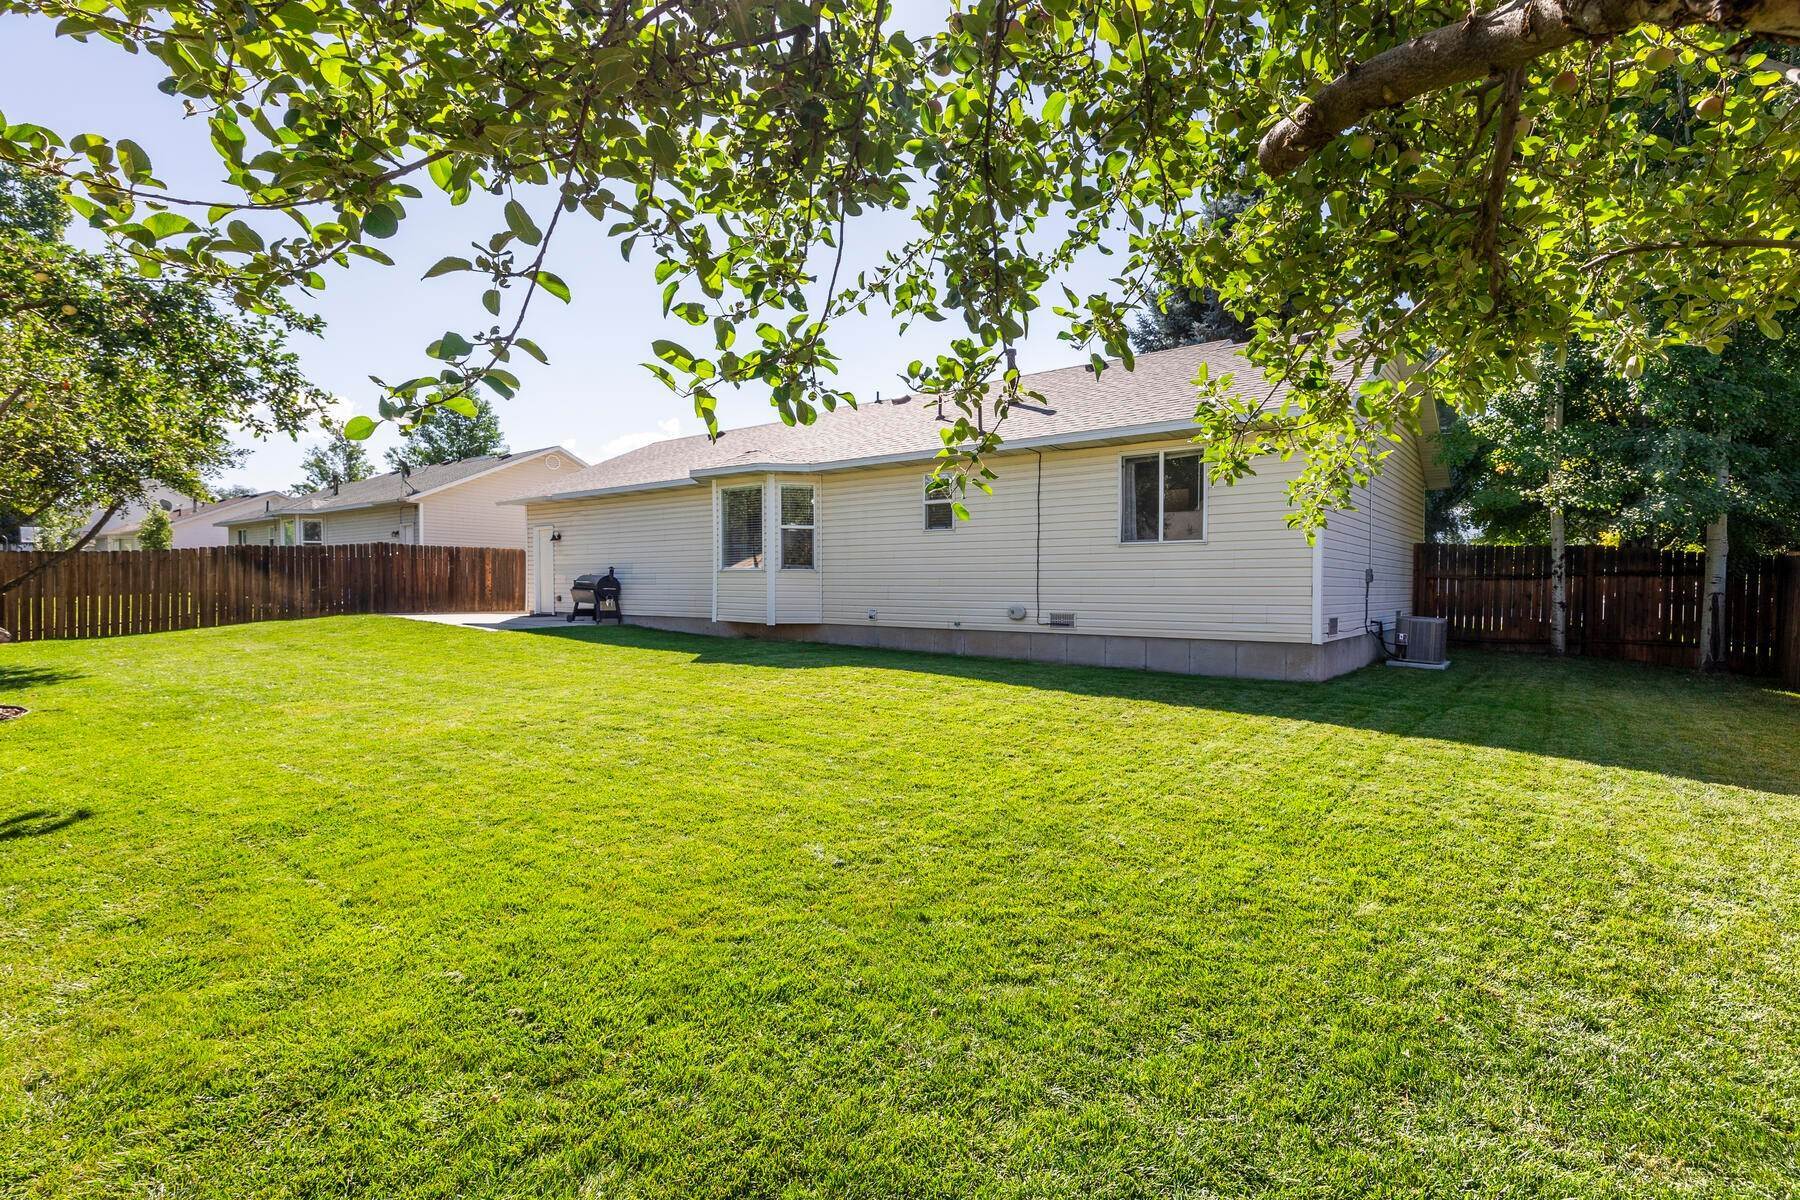 20. Single Family Homes for Sale at Like New! New Roof! New Flooring! New Paint! New Furnace! New Water Heater! 1069 East Center Street Heber City, Utah 84032 United States